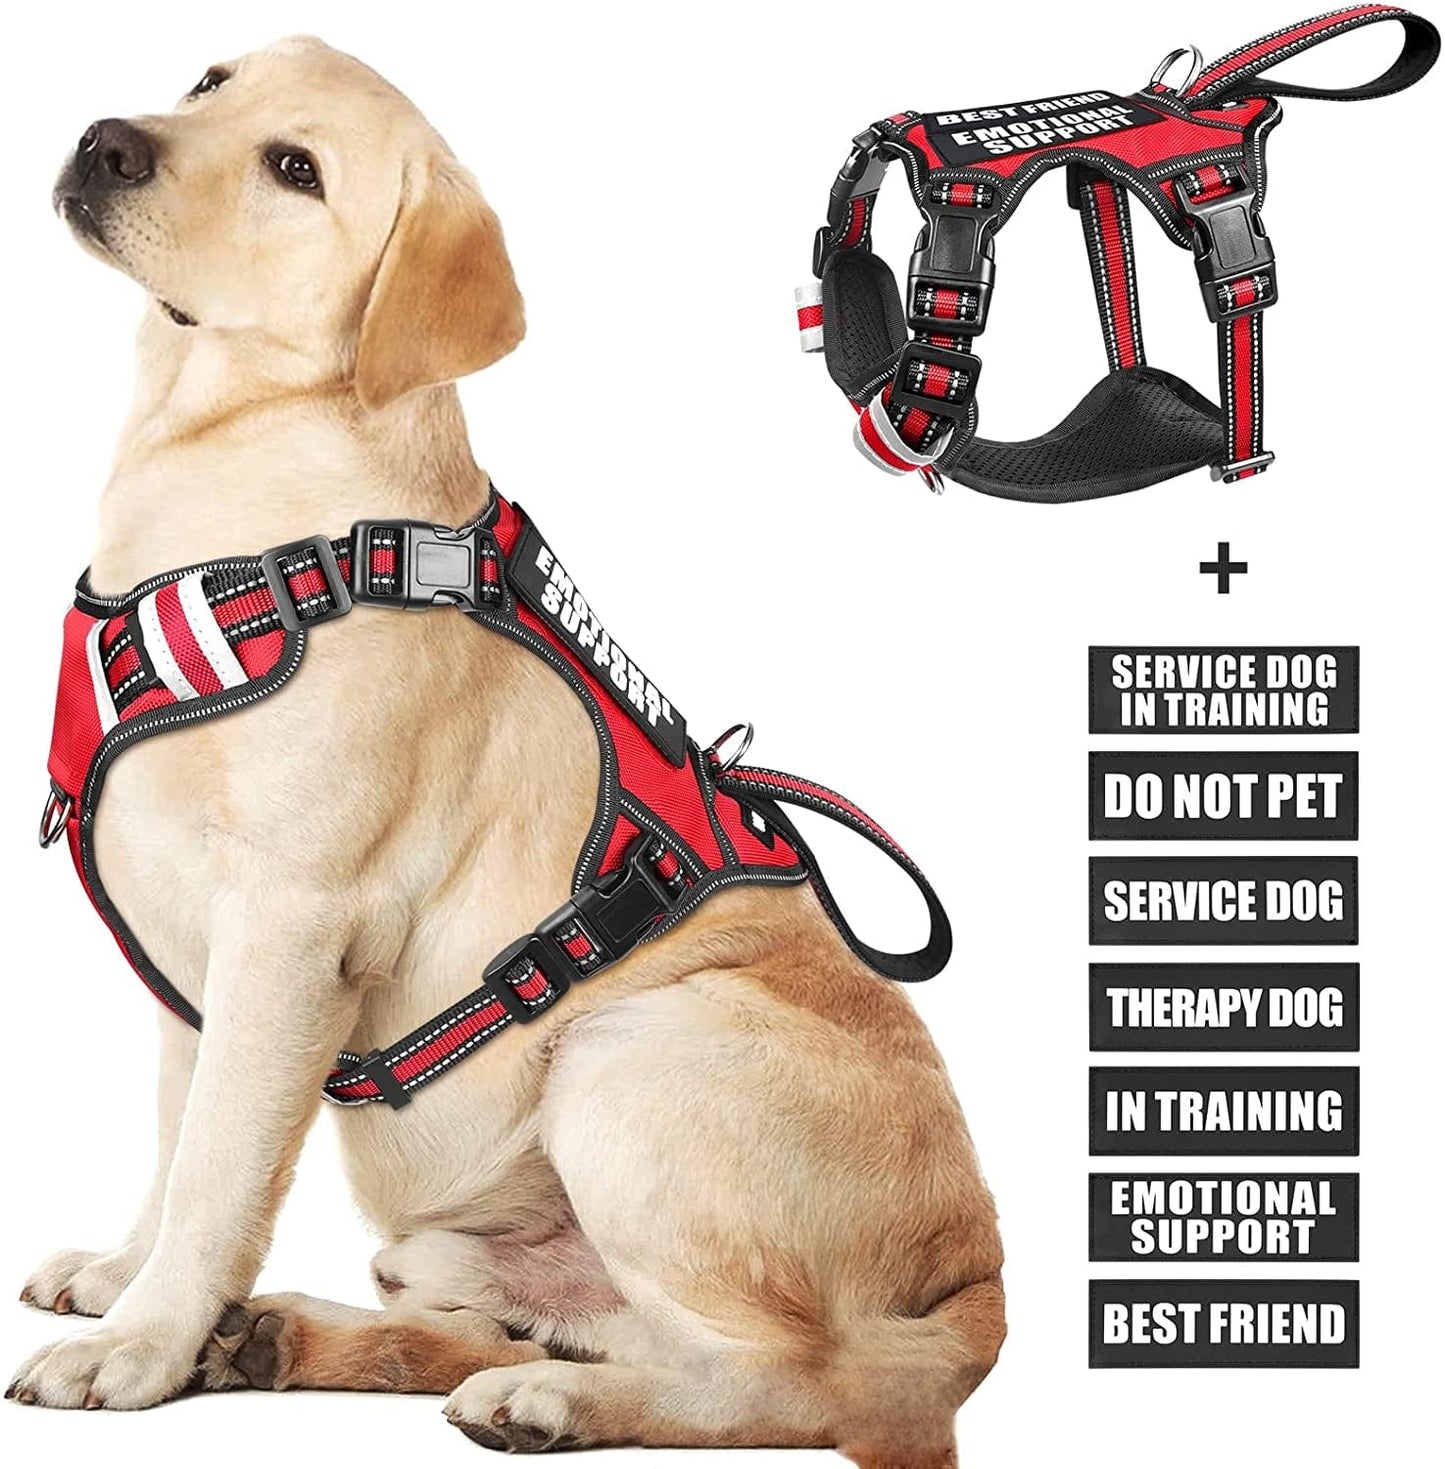 WINSEE Service Dog Vest No Pull Dog Harness with 7 Dog Patches, Reflective Pet Harness with Durable Soft Padded Handle for Training Small, Medium, Large, and Extra-Large Dogs (Large, Red)